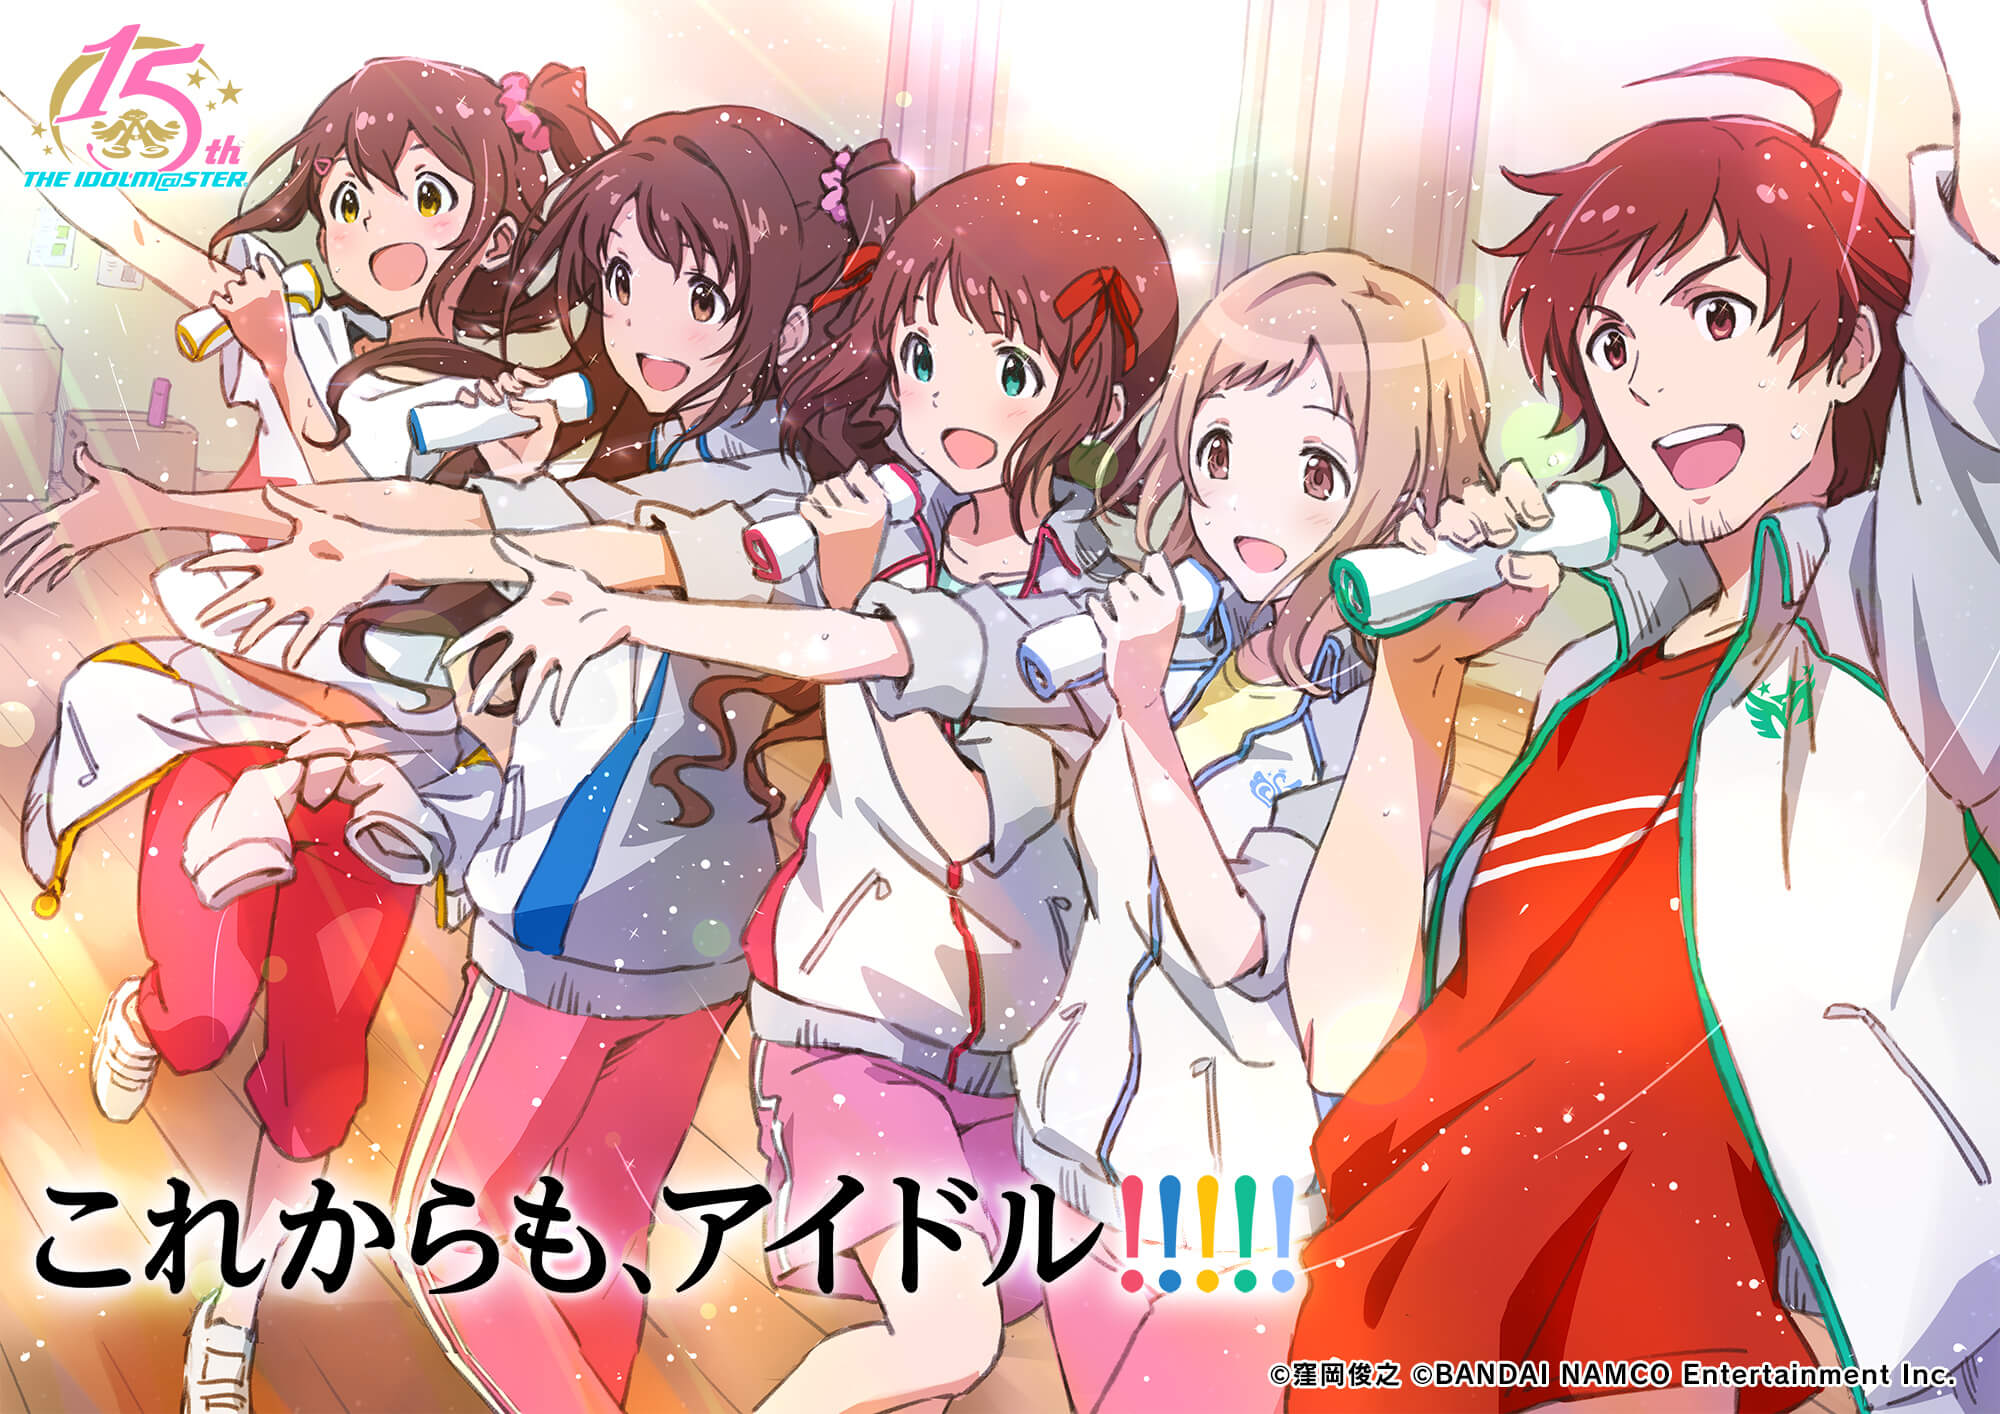 The Idolmaster Celebrates 15th Anniversary In Japan